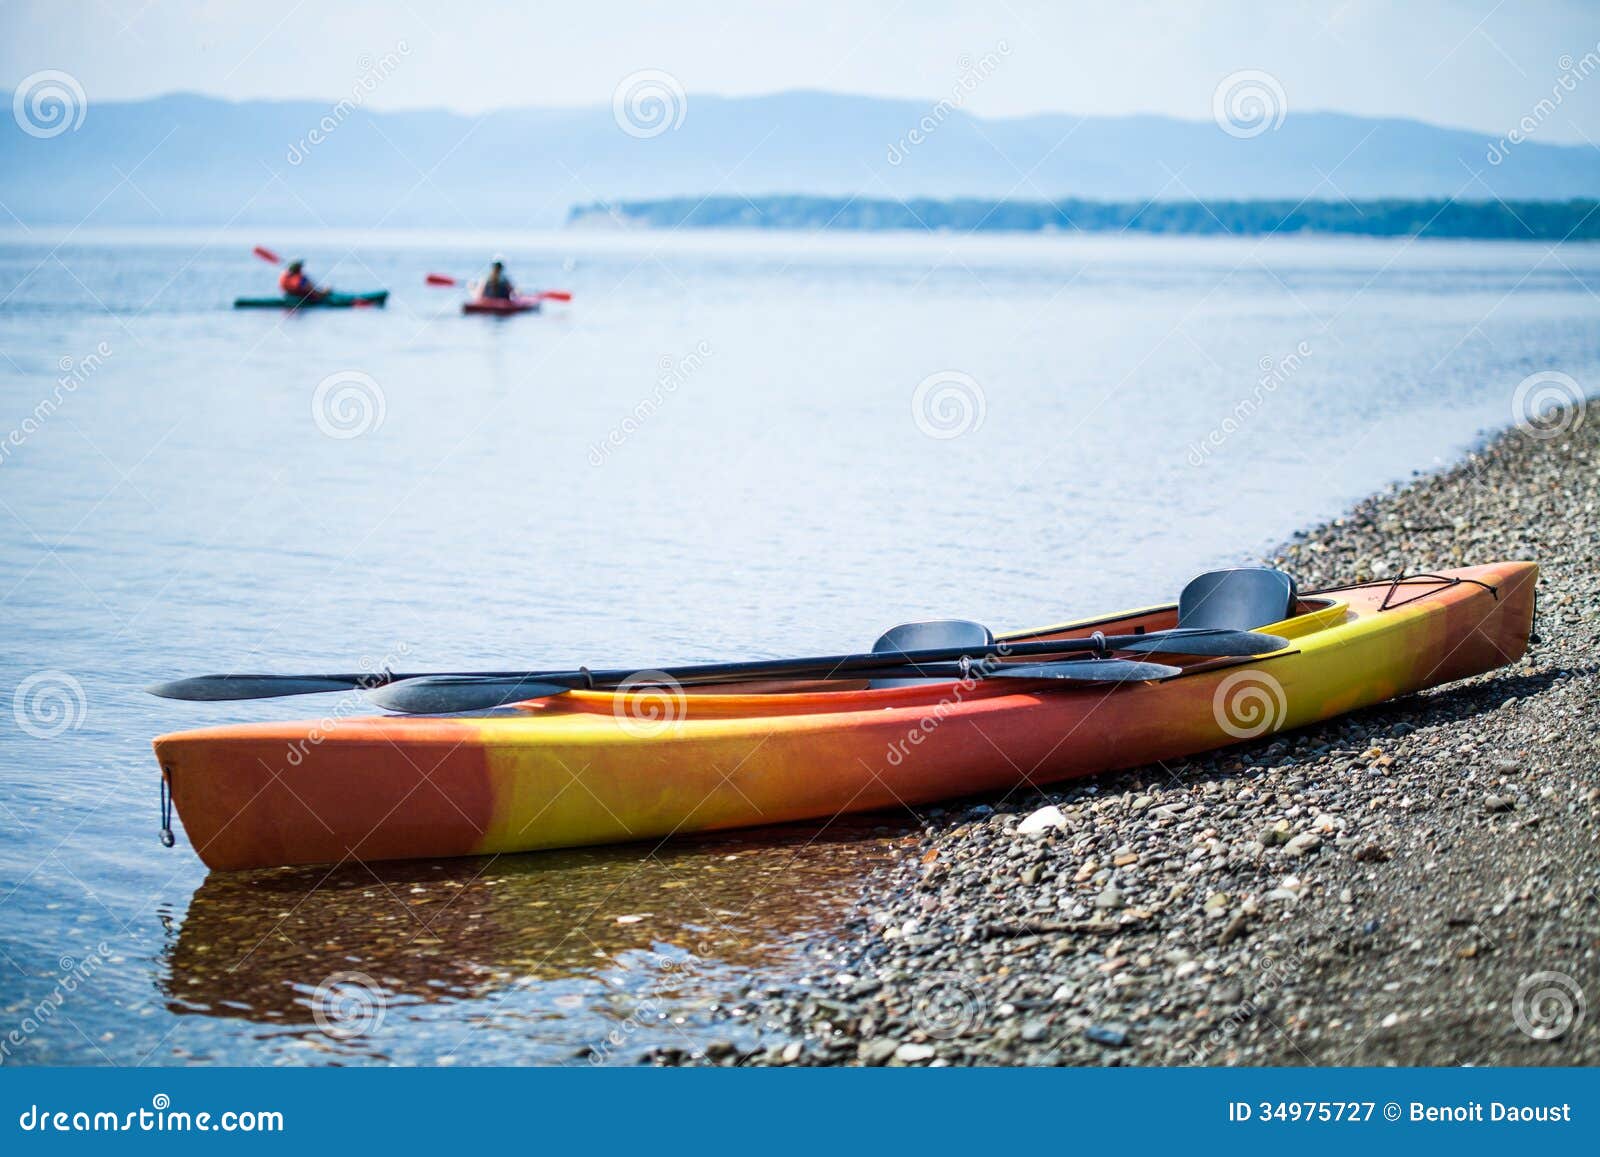 Kayak on the Sea Shore with Kayakers in the Background Stock Image ...